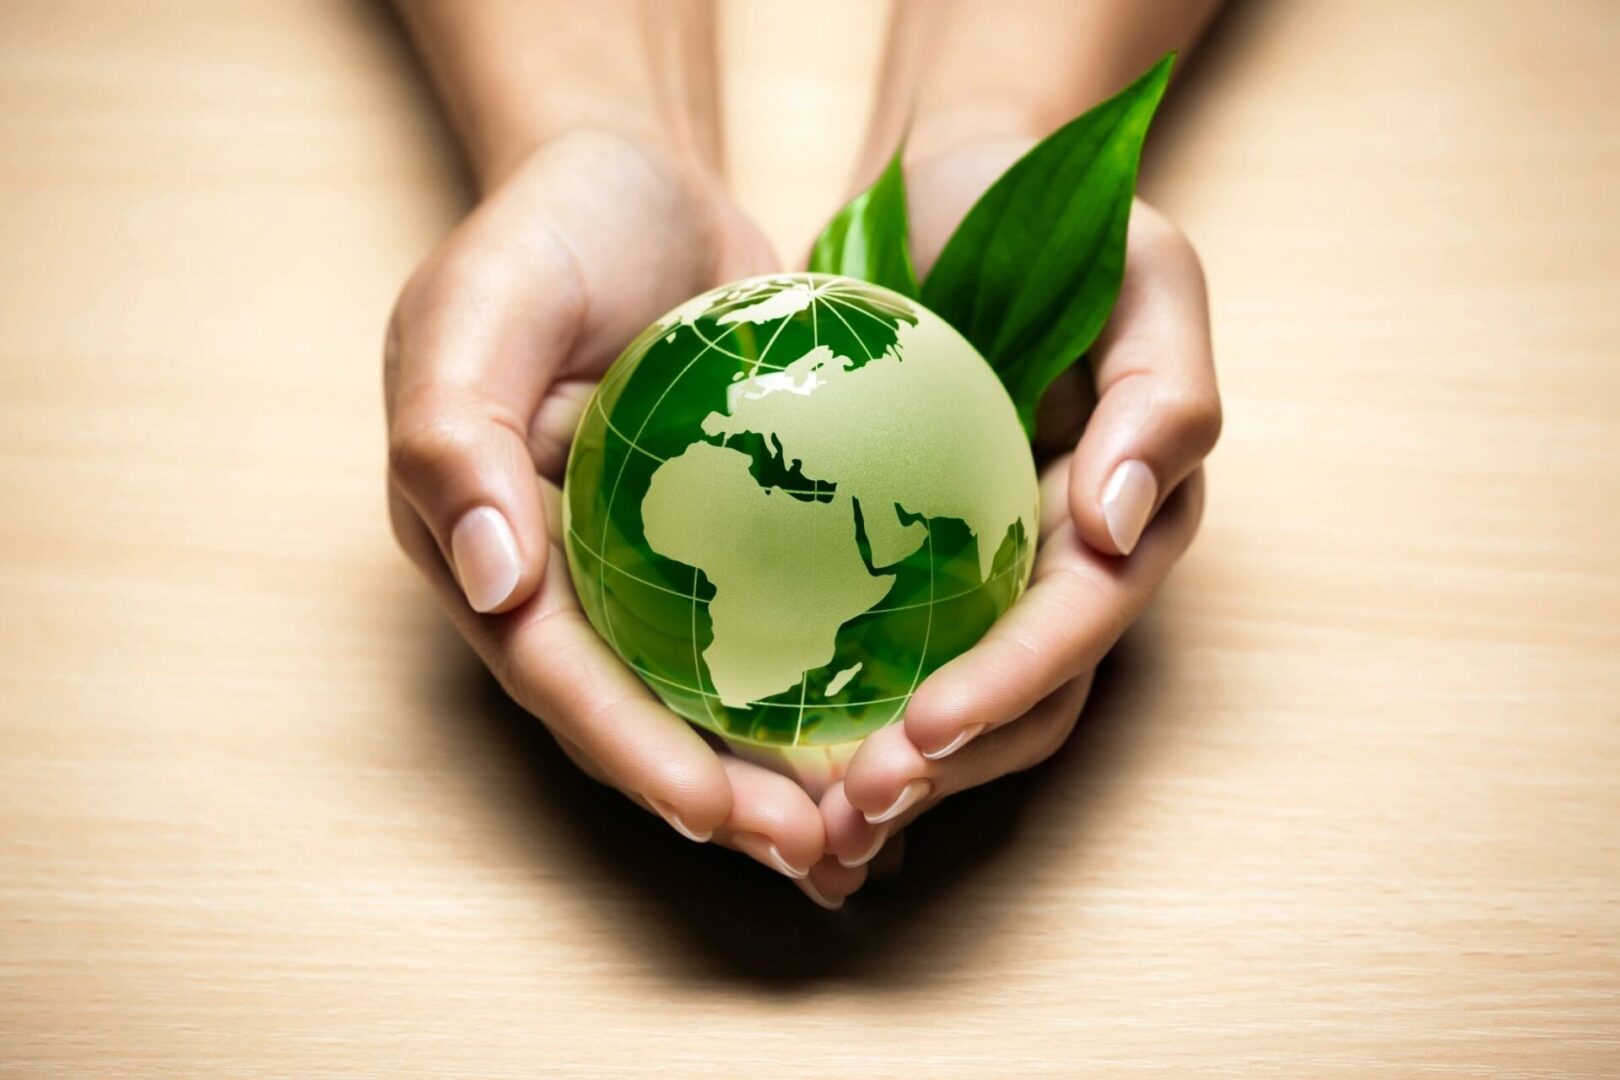 A person holding a green globe in their hands.